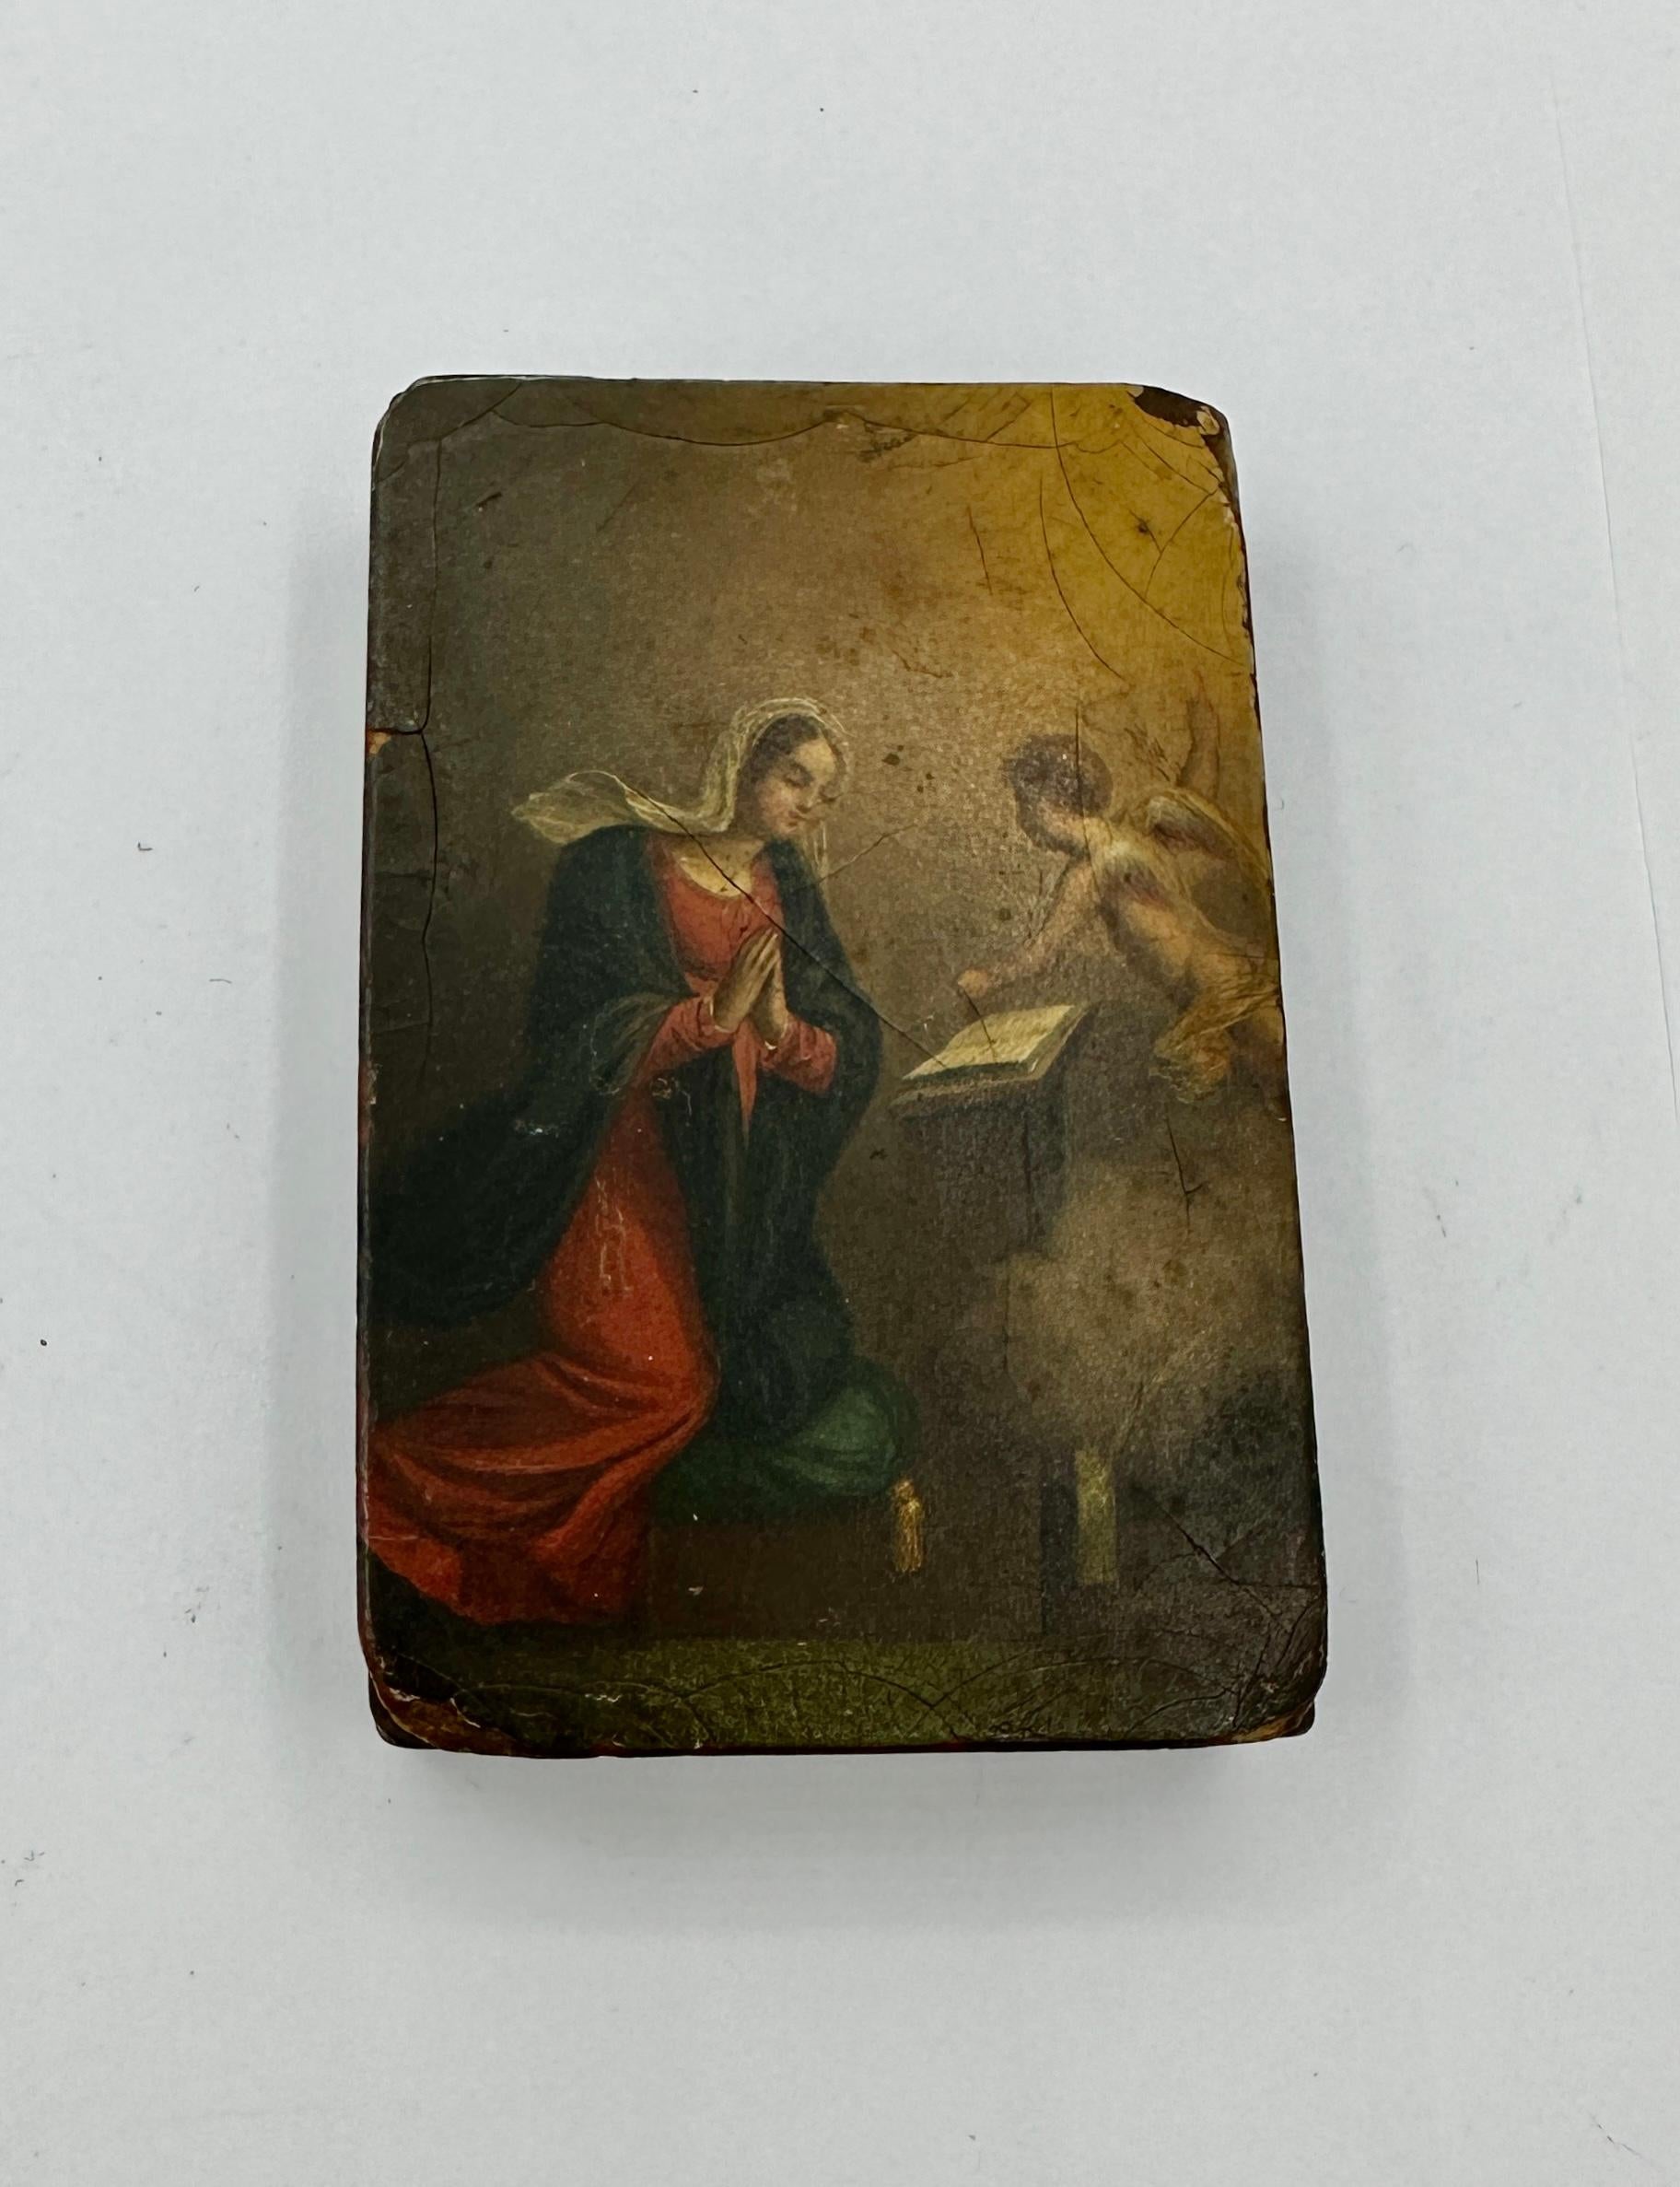 This is a wonderful and rare 18th to 19th Century Antique Box with an extraordinary hand painted portrait miniature of the Annunciation with Mary and the Angel Gabriel.   It depicts the angel Gabriel announcing to Mary that she would conceive